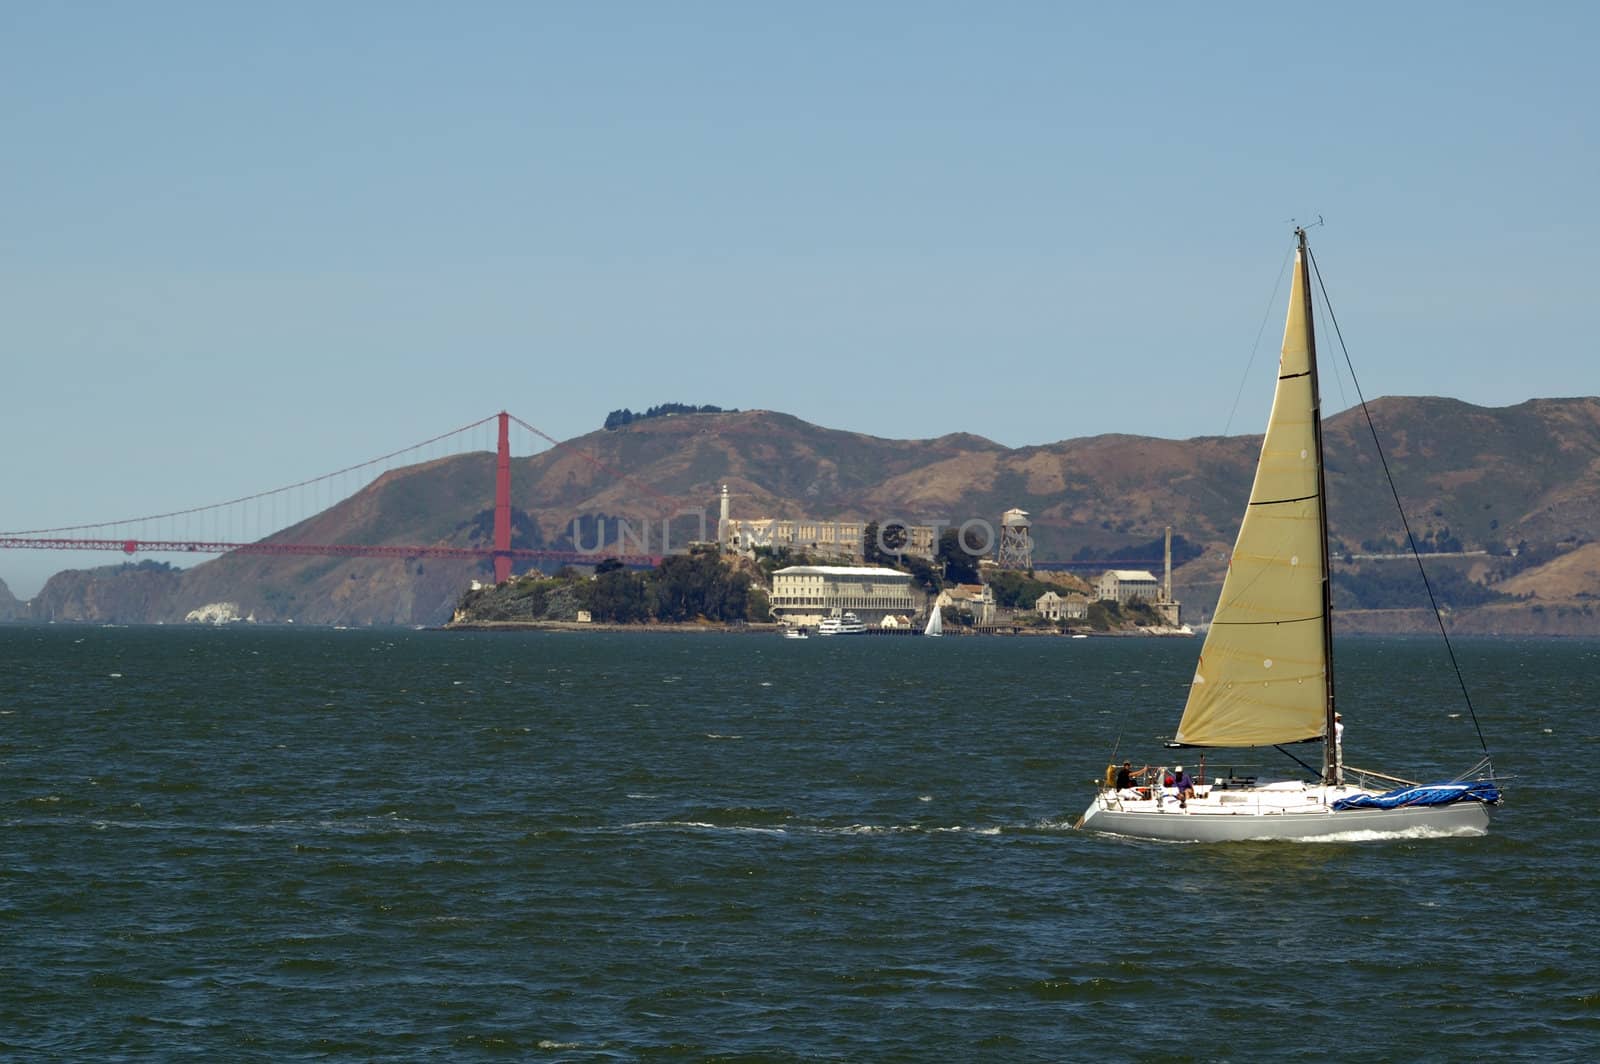 Yatch sailing on San Francisco bay with the Golden Gate bridge and Alcatraz in the distance with Marin Headlands behind